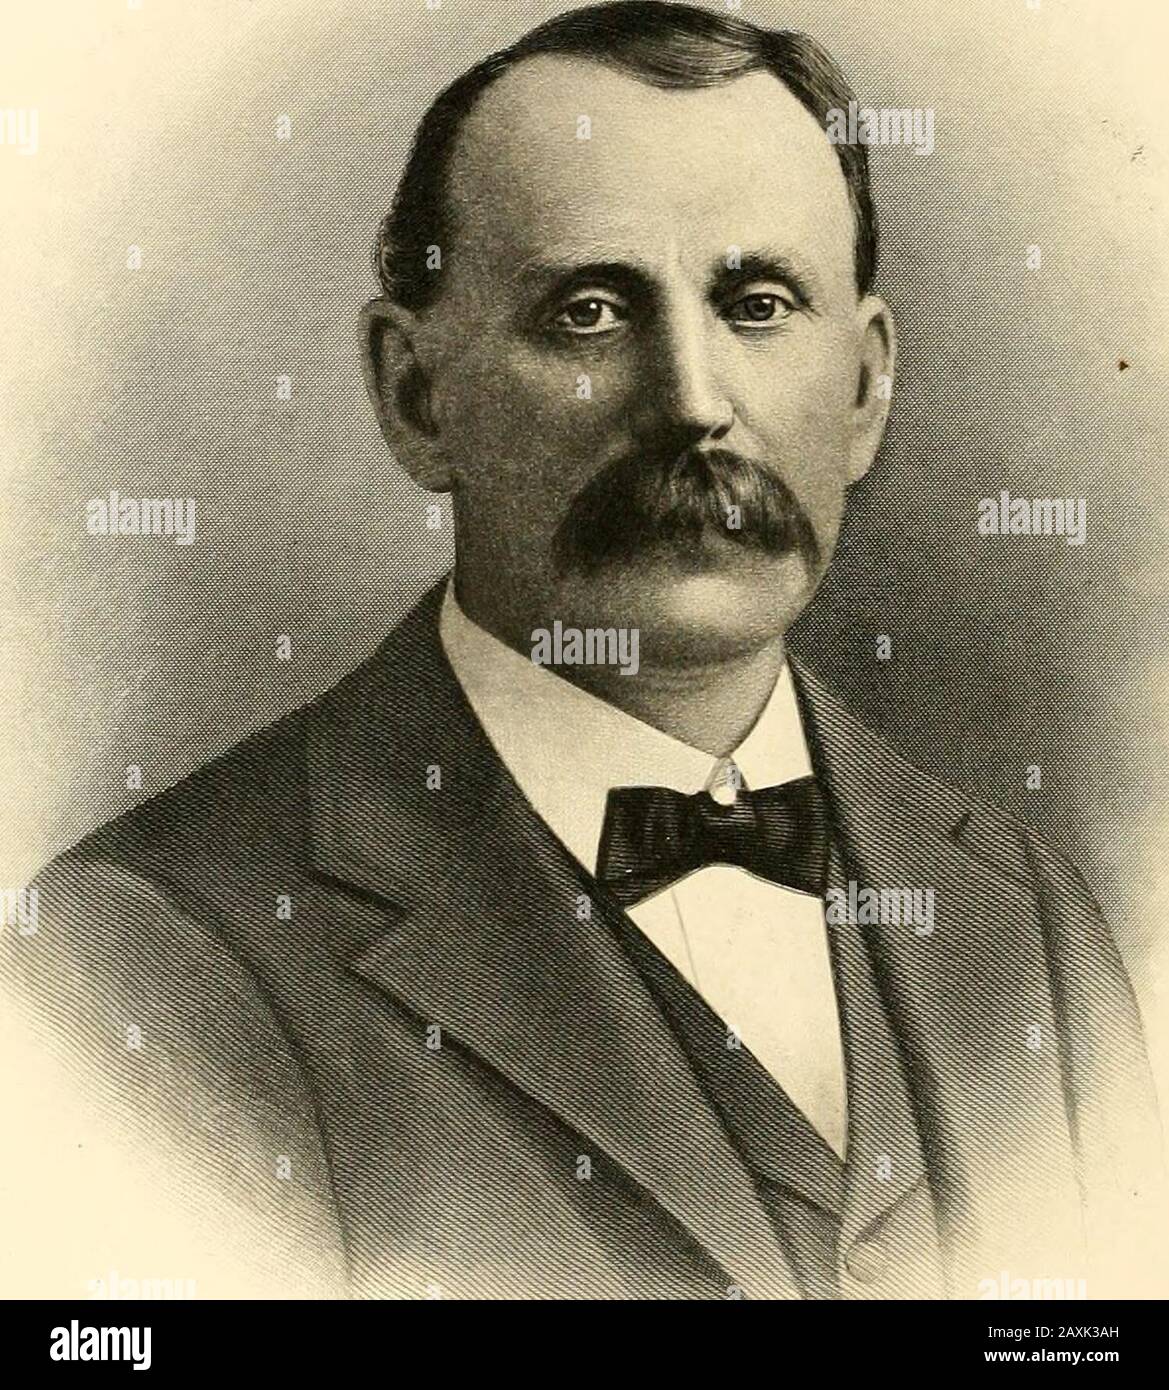 History of Orange County, California : with biographical sketches of the leading men and women of the county who have been identified with its earliest growth and development from the early days to the present . obtained,and the example of their enterprise meant much for the progress and welfare of theirneighborhood. For several years Mr. Lamb was the resident manager of the Los Bolsas LandCompany and other large ranches, and through his work much improvement wasmade on the tracts under his charge. He early saw the necessity for drainage andirrigation, and with several associates purchased a d Stock Photo